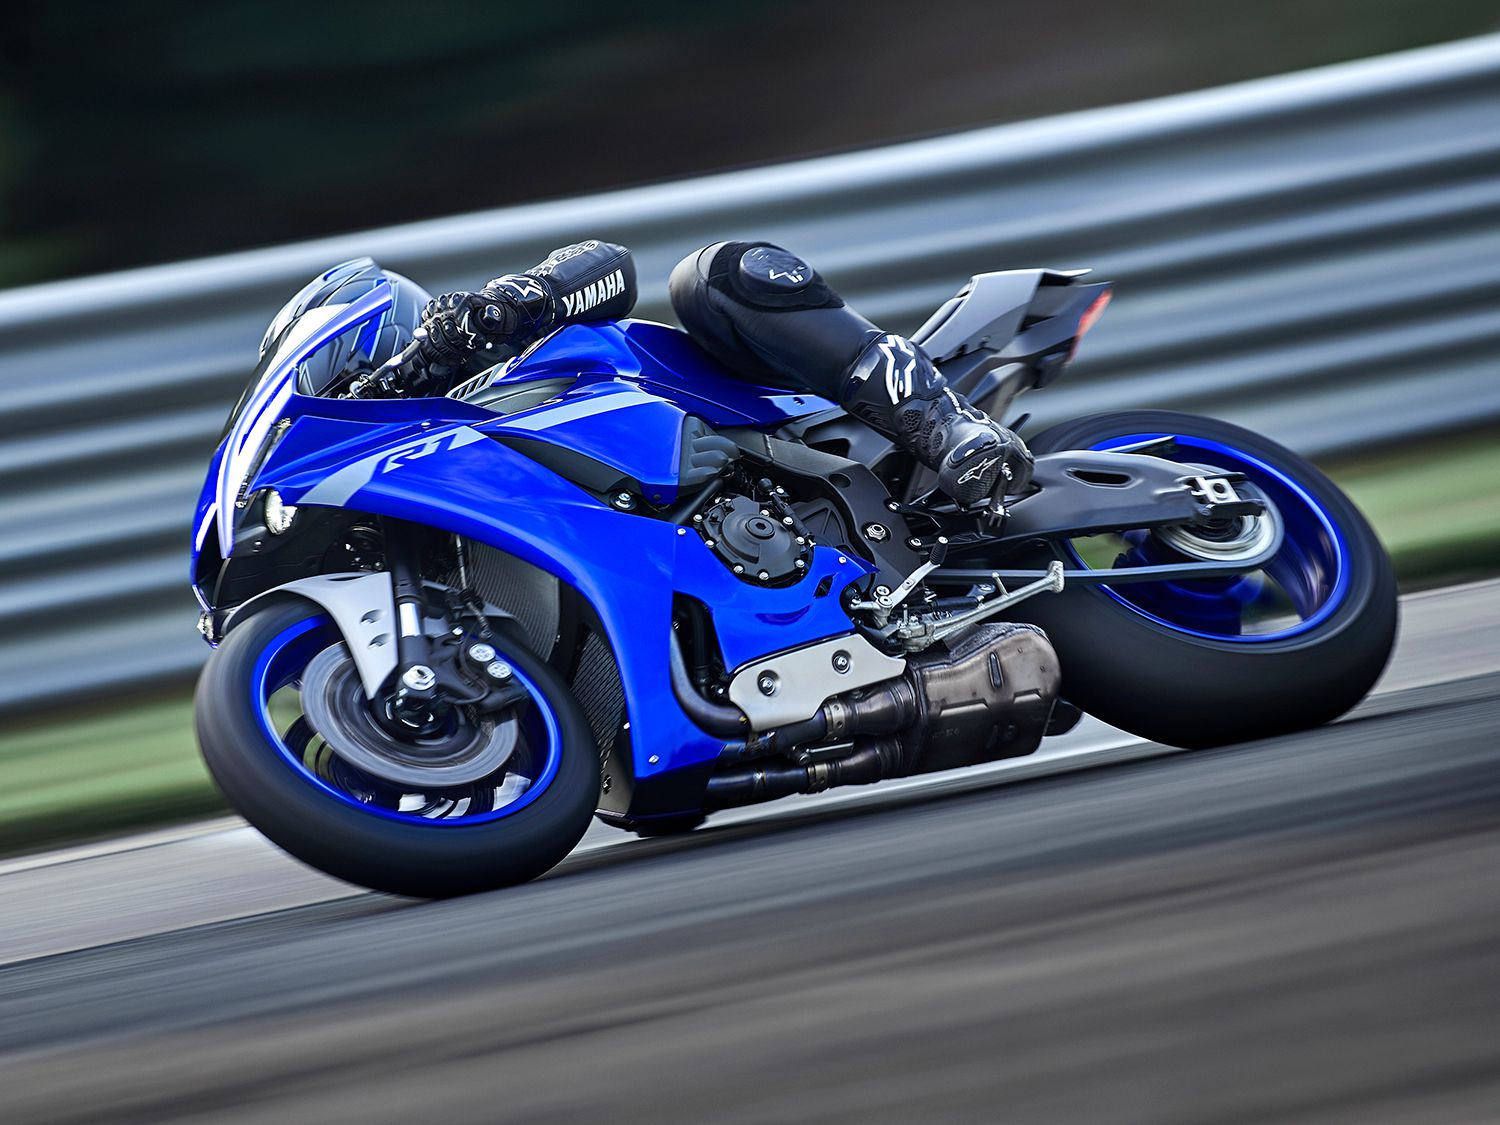 As expected, Yamaha’s new 2020 YZF-R1 makes our list of the fastest production motorcycles you can buy today.